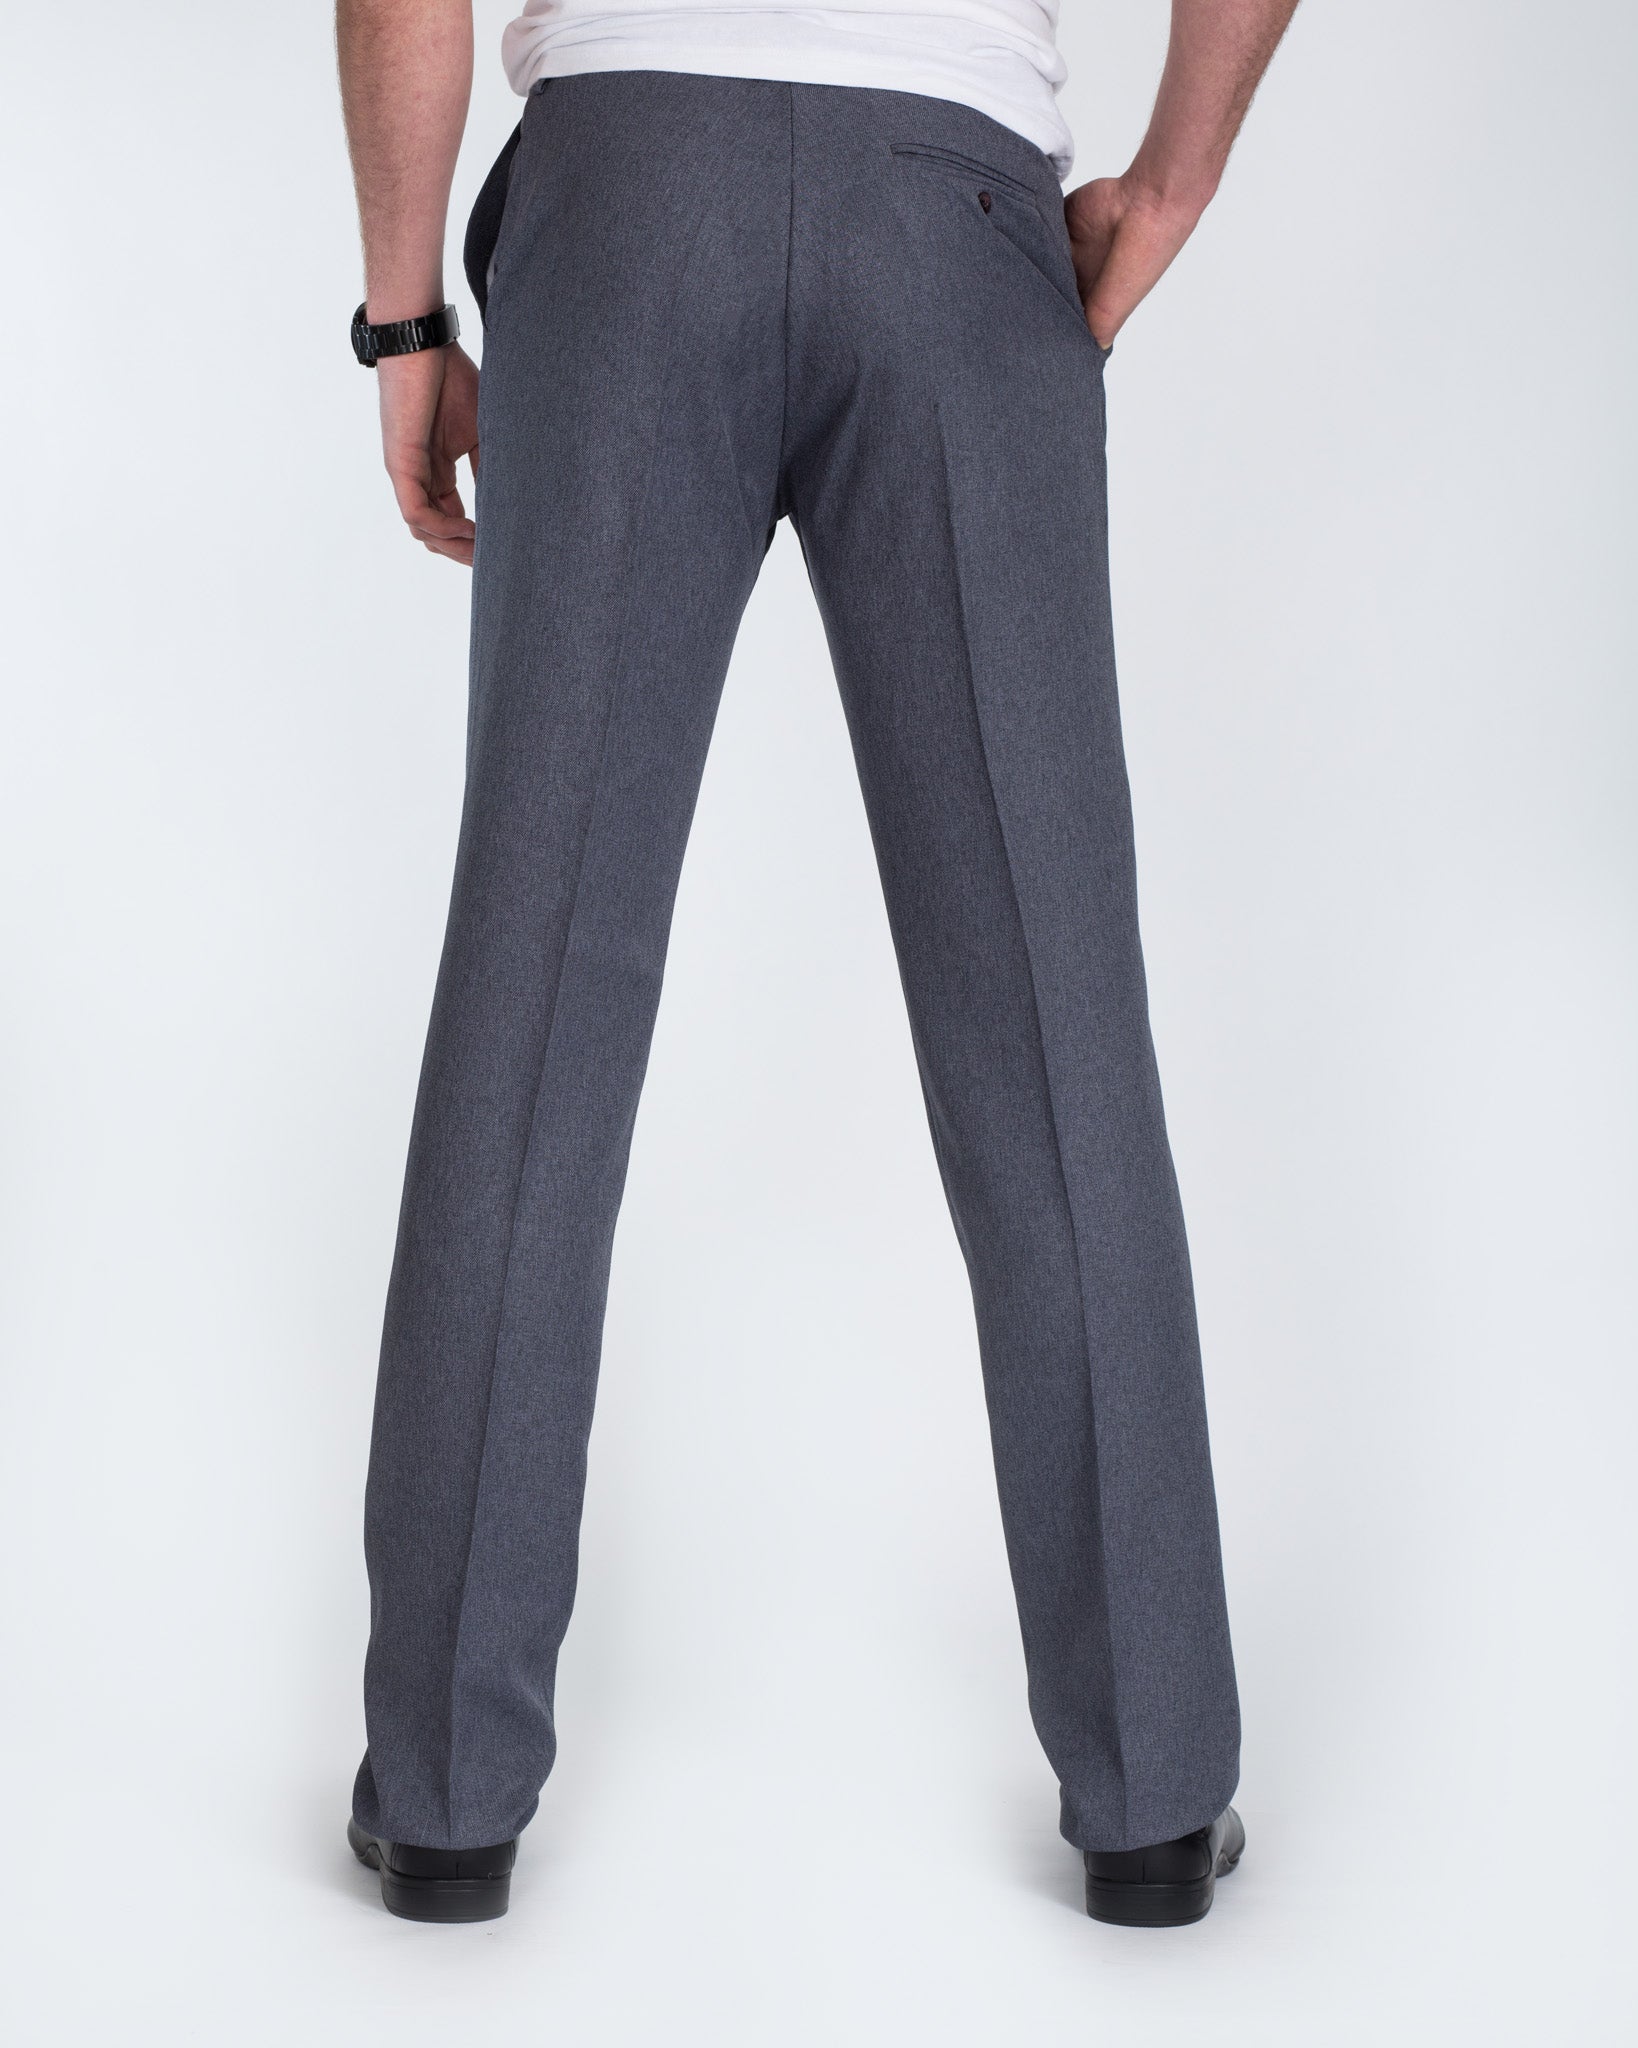 Carabou Stretch Tall Trousers (airforce grey)